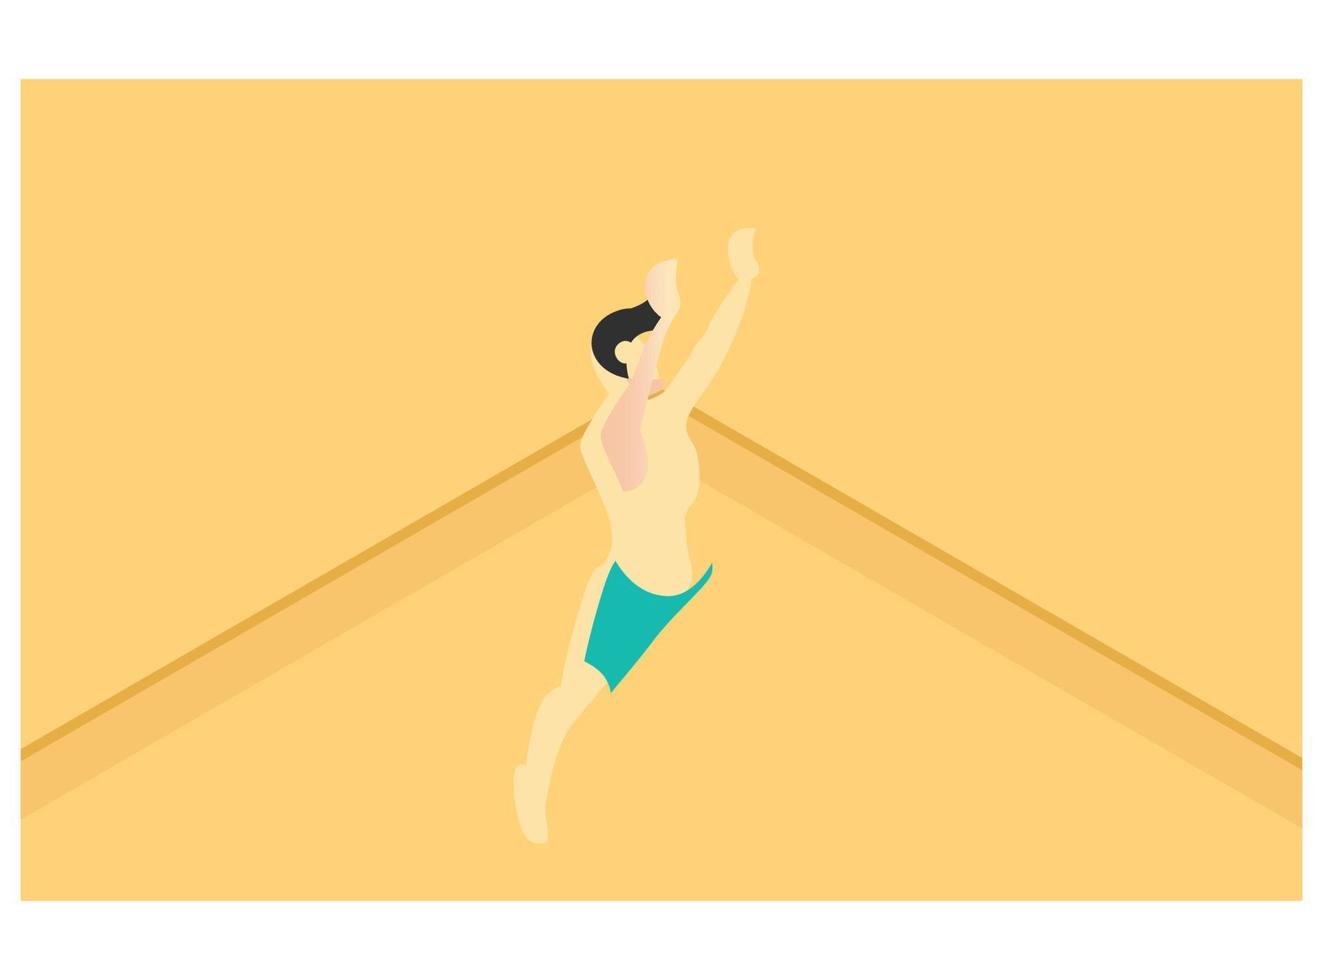 3D isometric playing beach volleyball on brown beach sand. Vector Isometric Illustration Suitable for Diagrams, Infographics, And Other Graphic assets